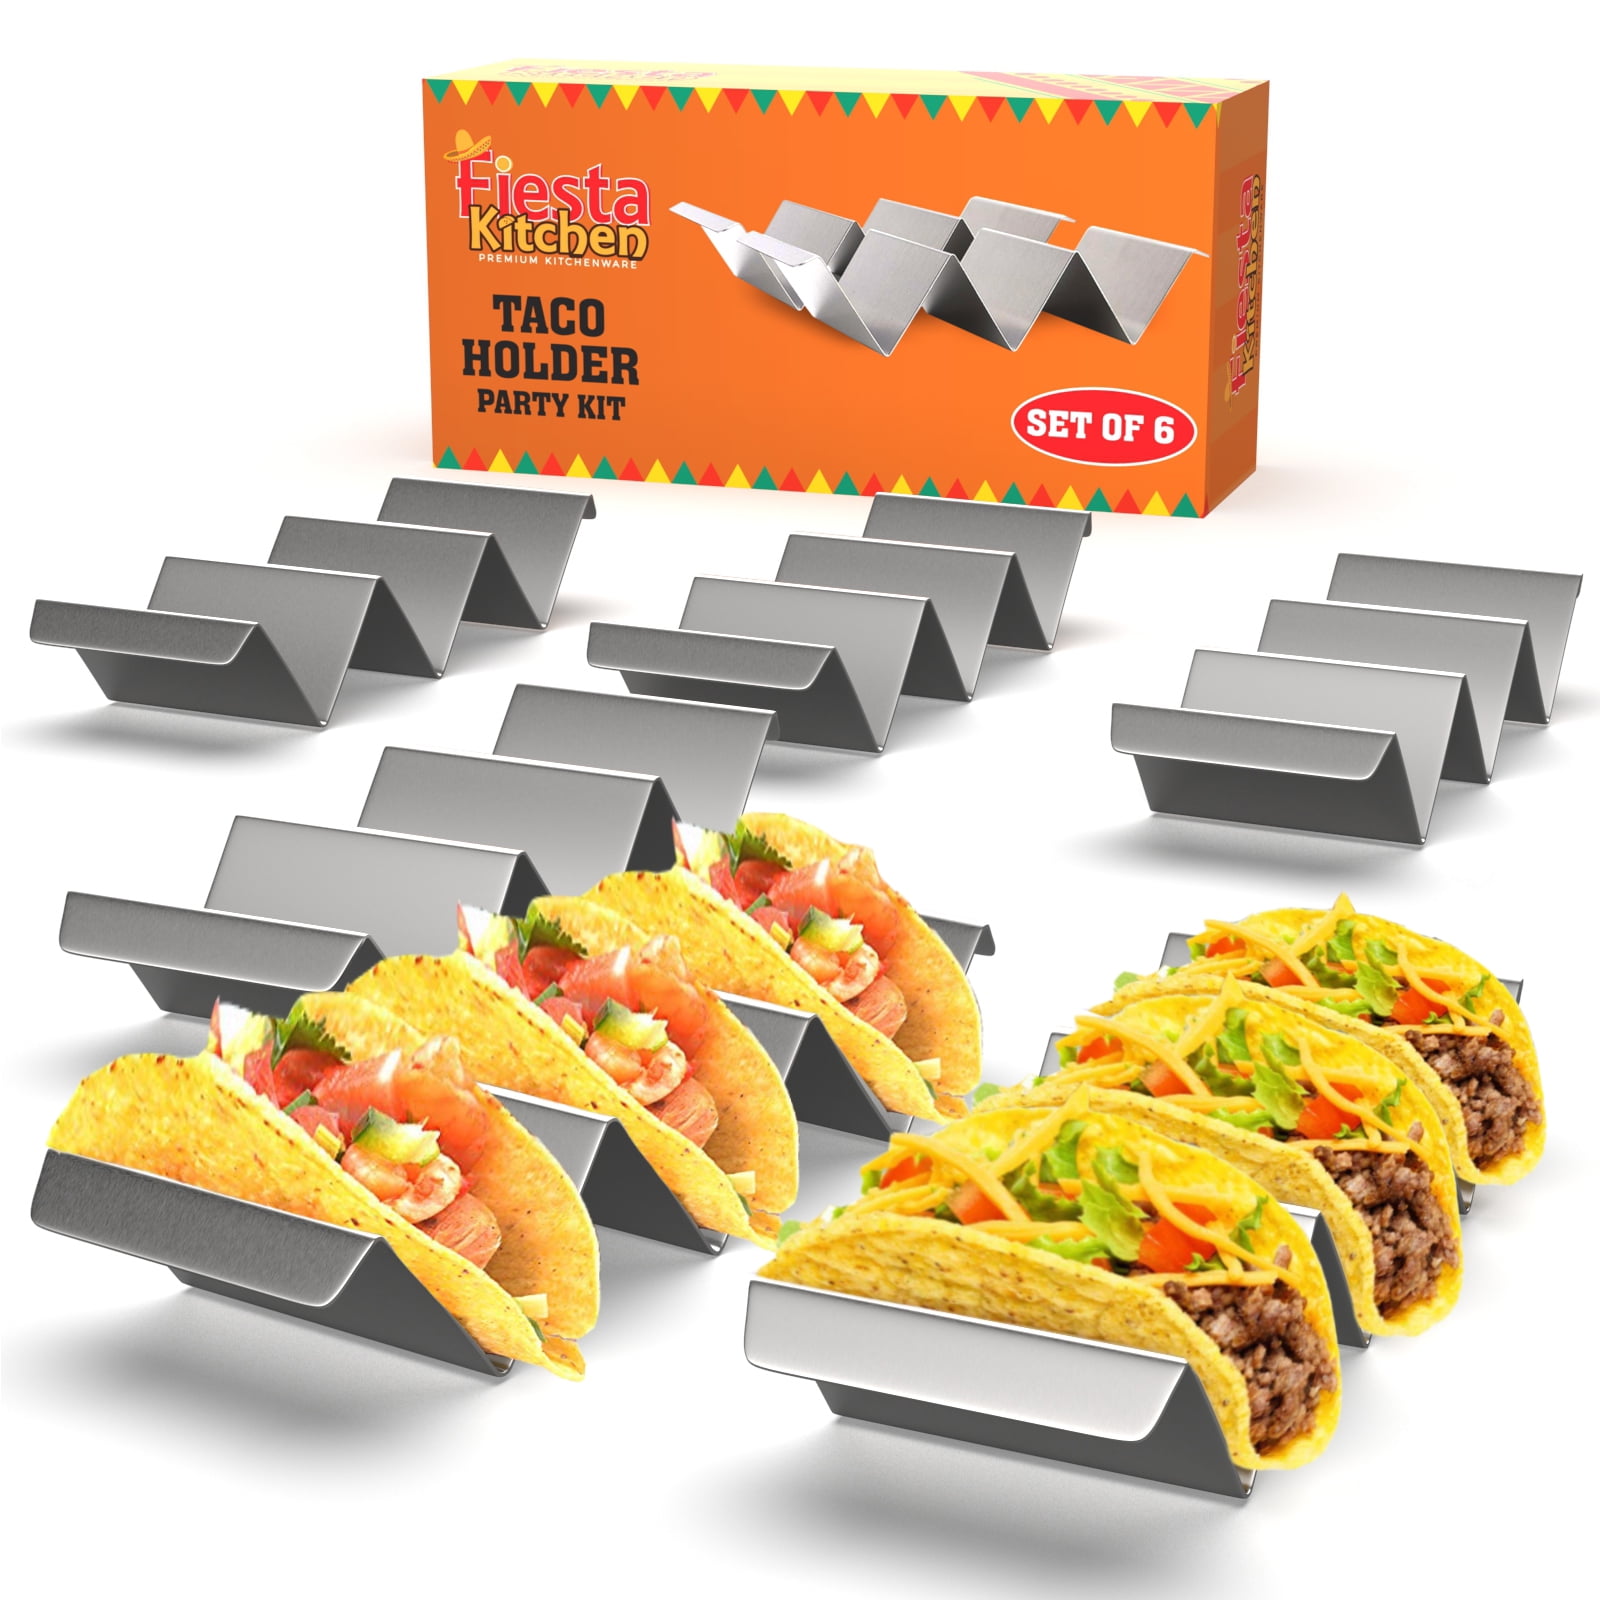 Set of 6 Fill & Serve Tacos With Ease NHZ Taco Holder Stand Taco Trays by Fiesta Kitchen Set of 6 Oven & Grill Safe Stainless Steel Taco Racks With Handles 